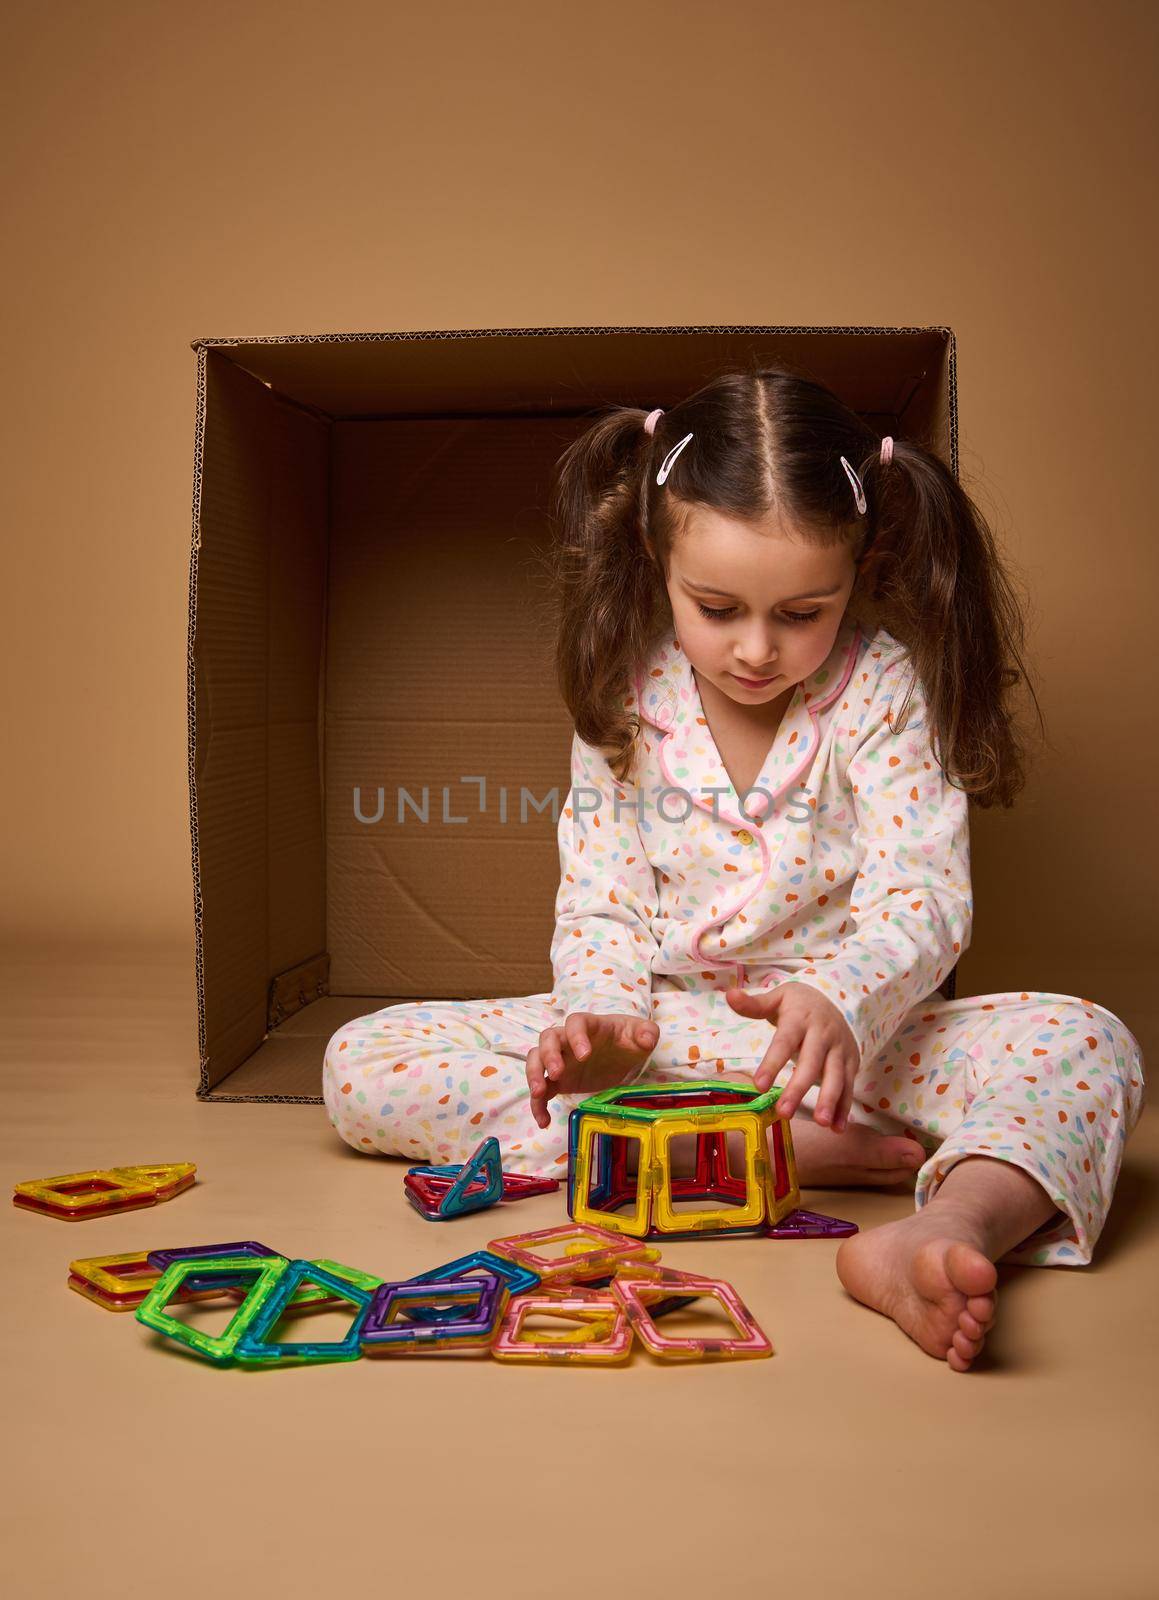 European little girl with two ponytails in pajamas playing with colorful magnetic constructor toy on beige background with copy ad space